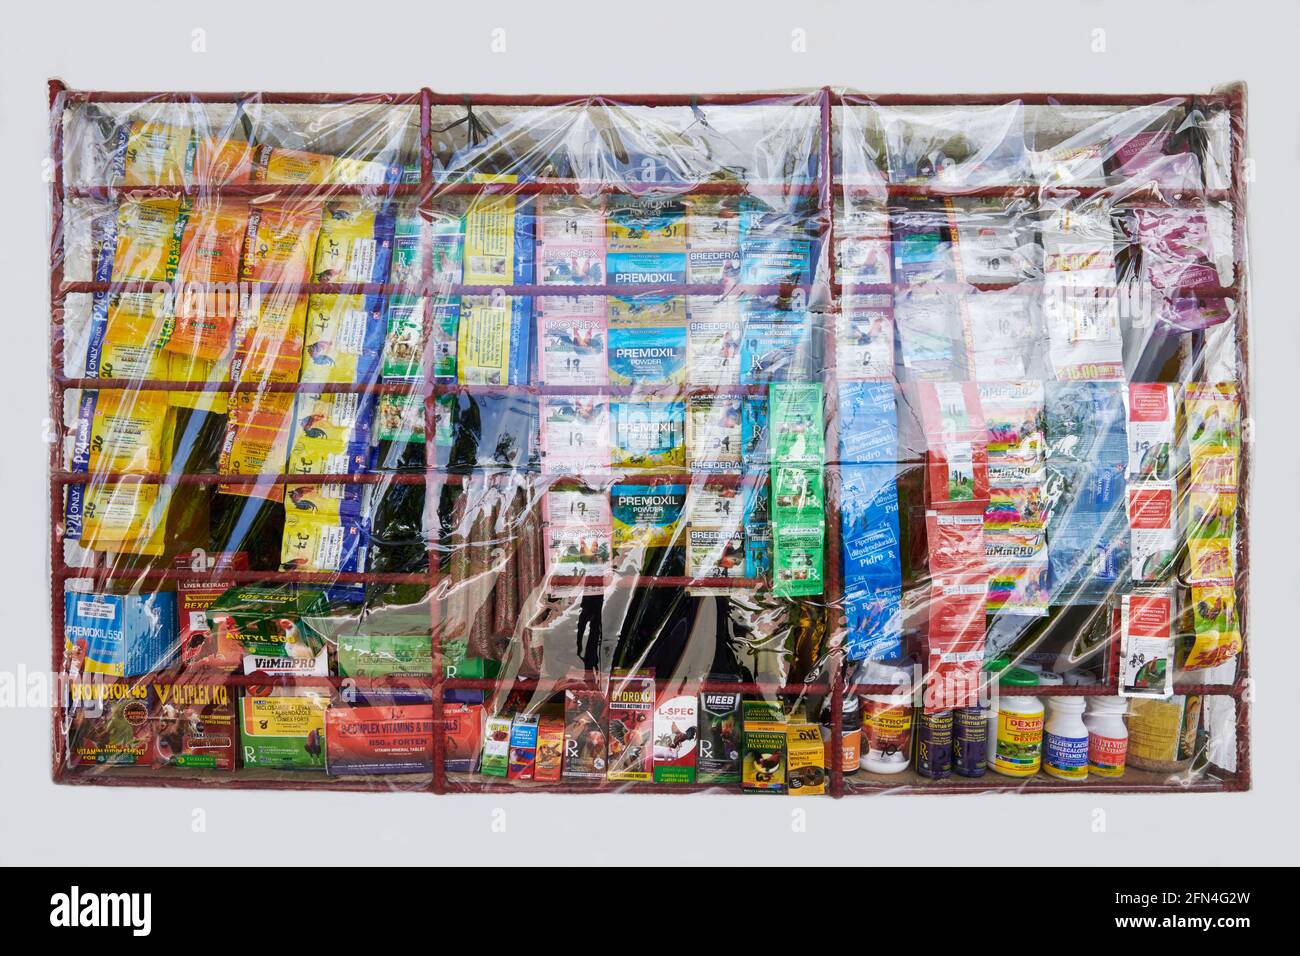 Grilled window of a neighborhood sari-sari store protected by plastic cover as a Covid precaution, selling veterinary medicines, Philippines Stock Photo